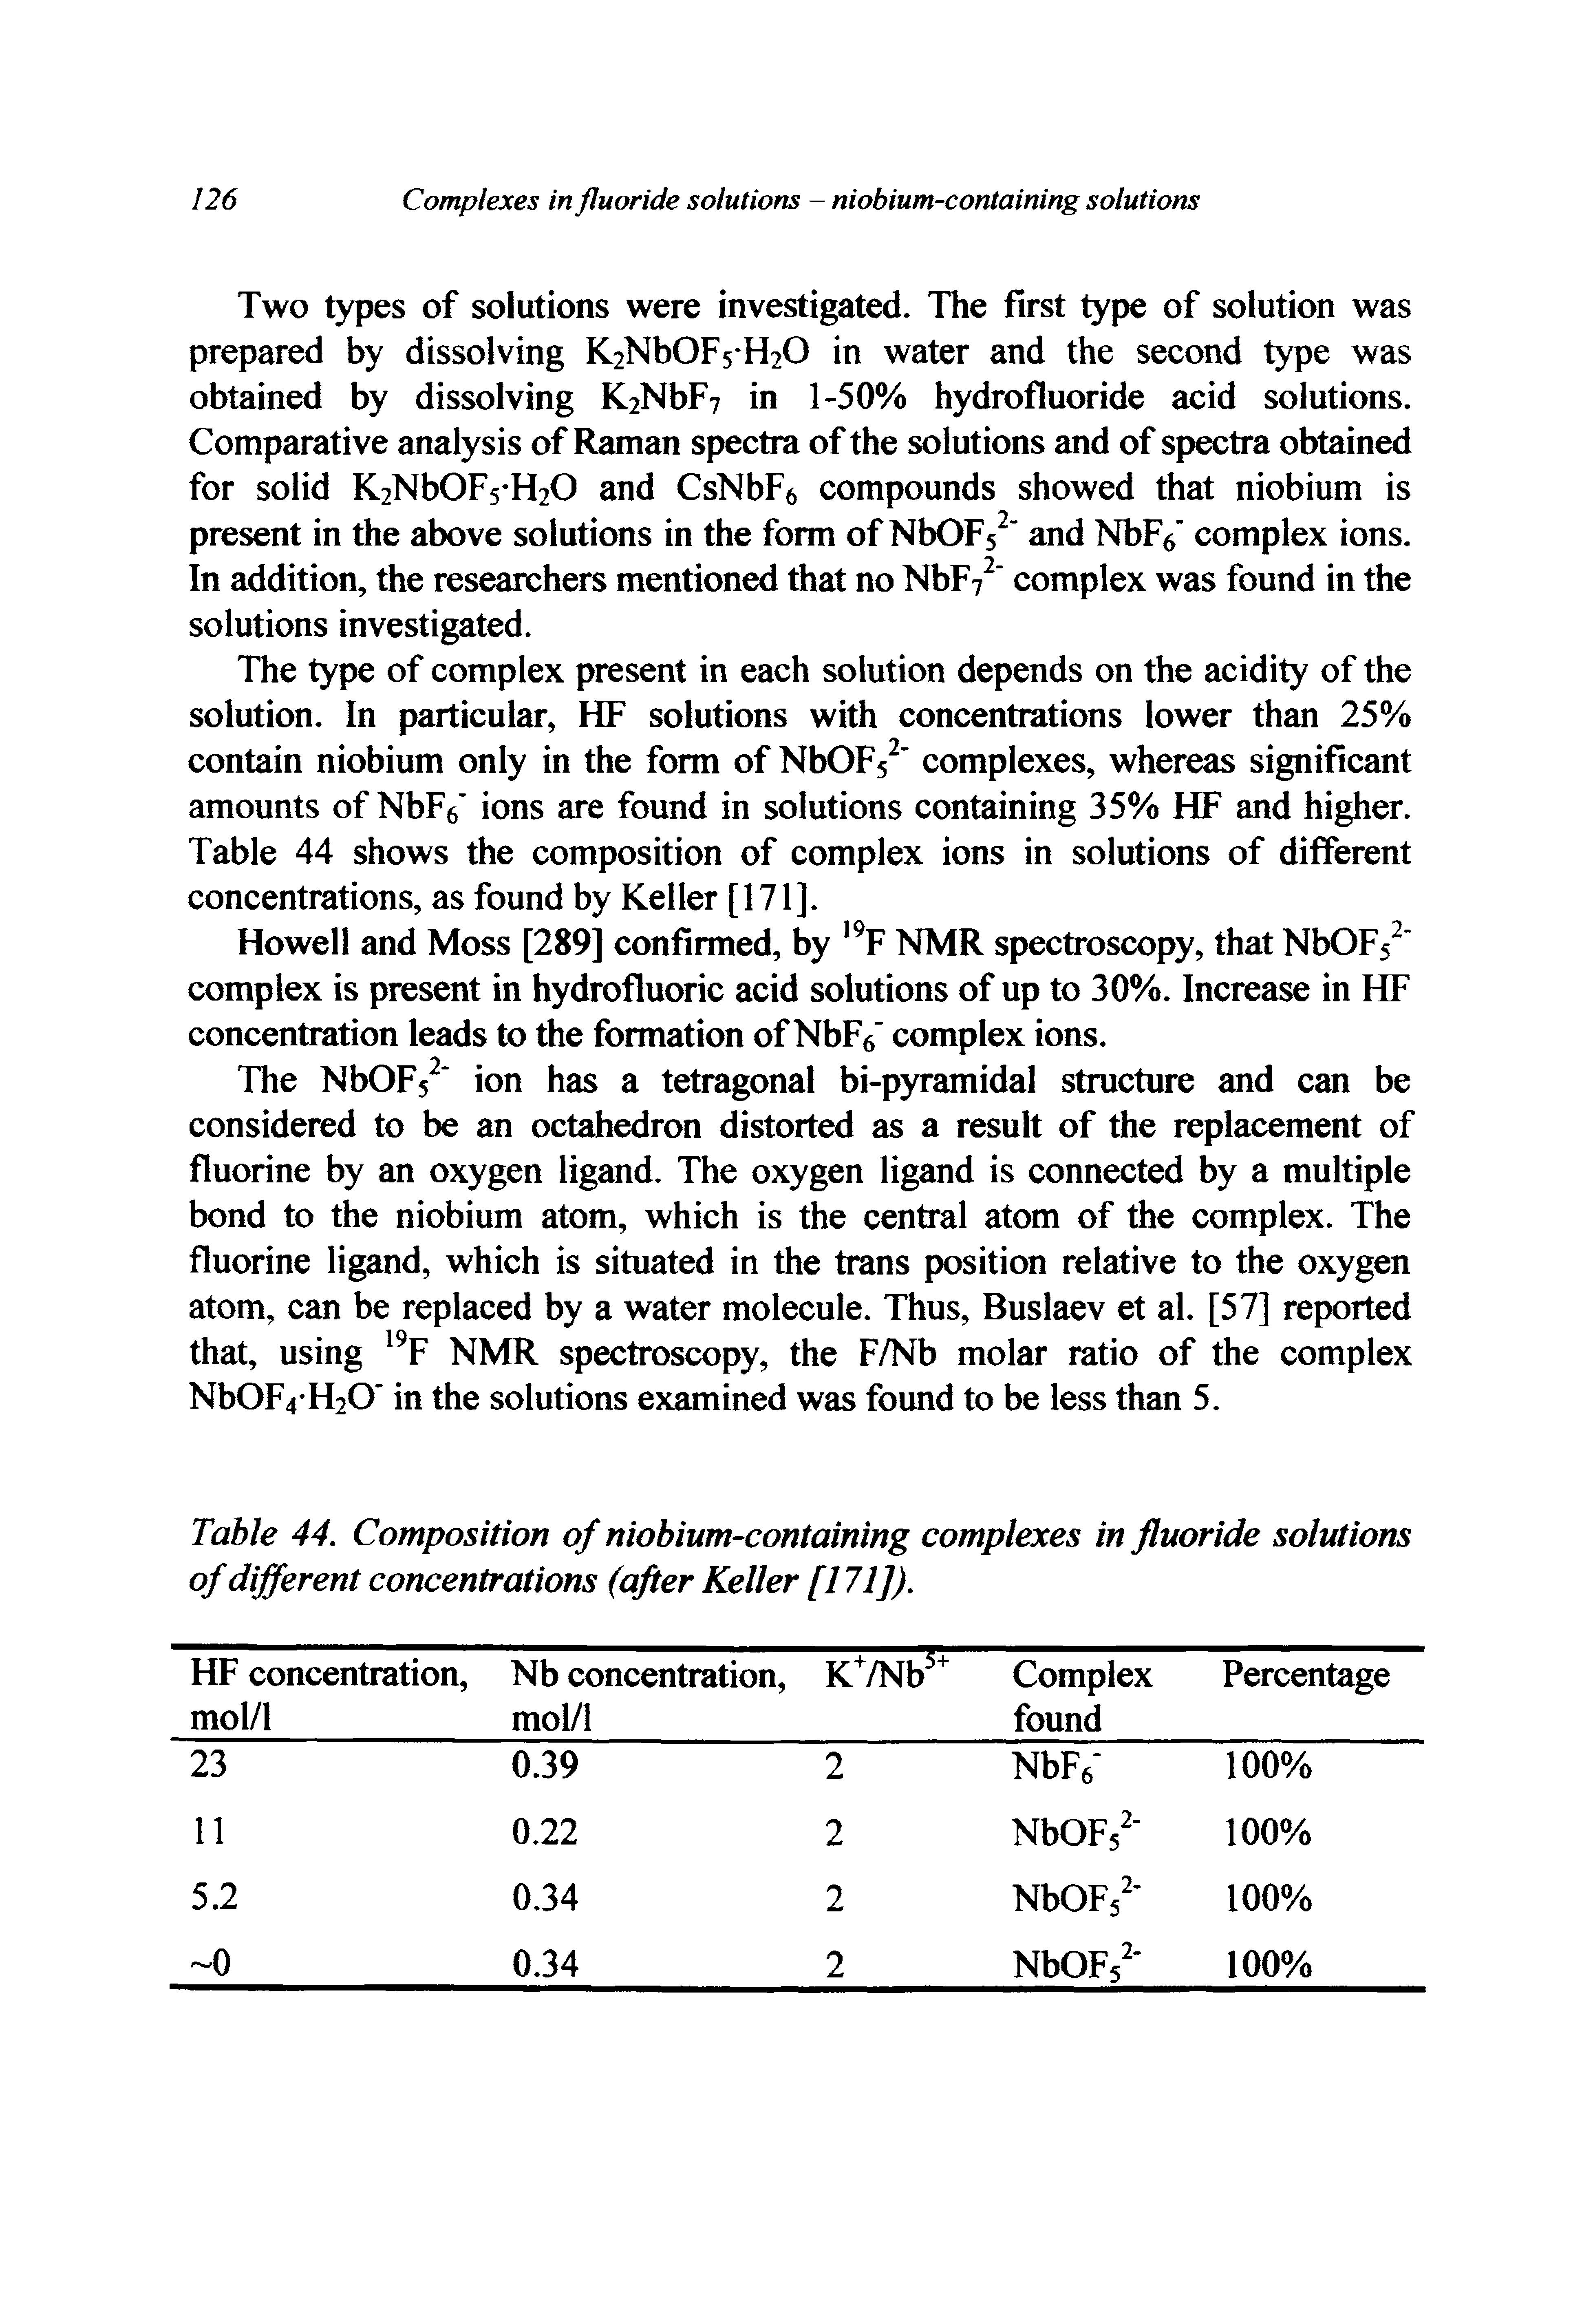 Table 44. Composition of niobium-containing complexes in fluoride solutions of different concentrations (after Keller [171]).